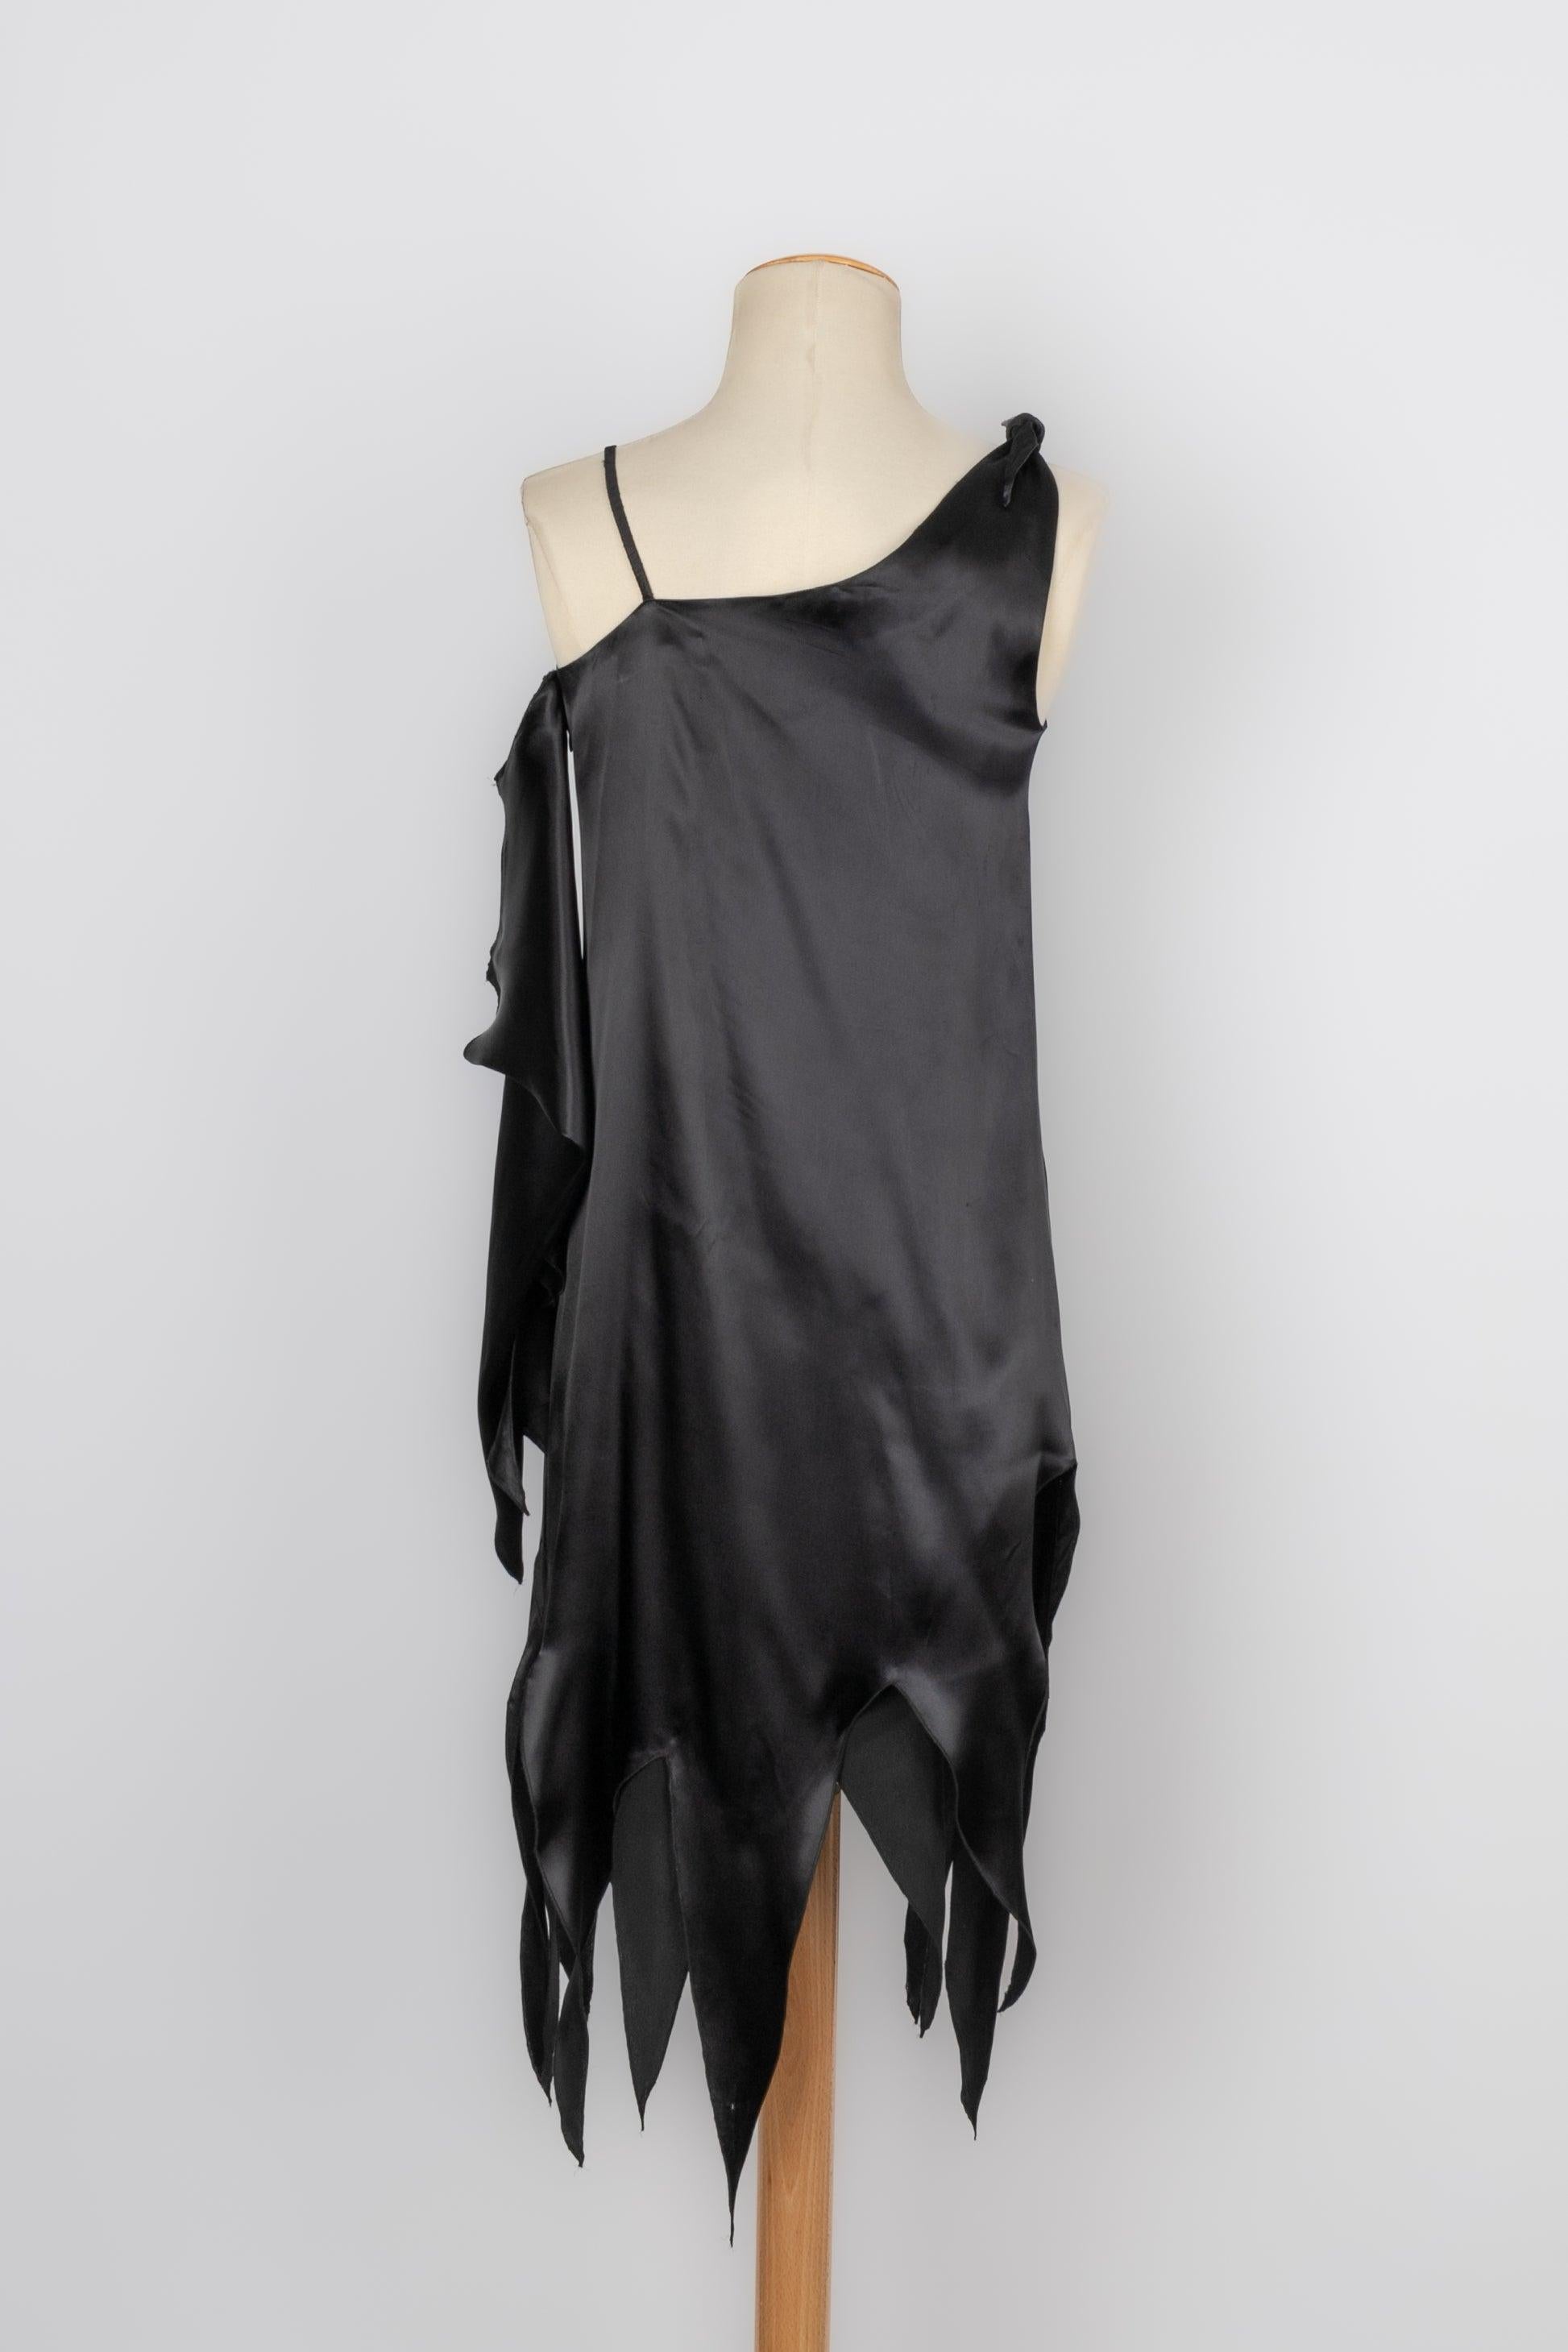 Givenchy Asymmetrical Dress in Black Satin In Excellent Condition For Sale In SAINT-OUEN-SUR-SEINE, FR